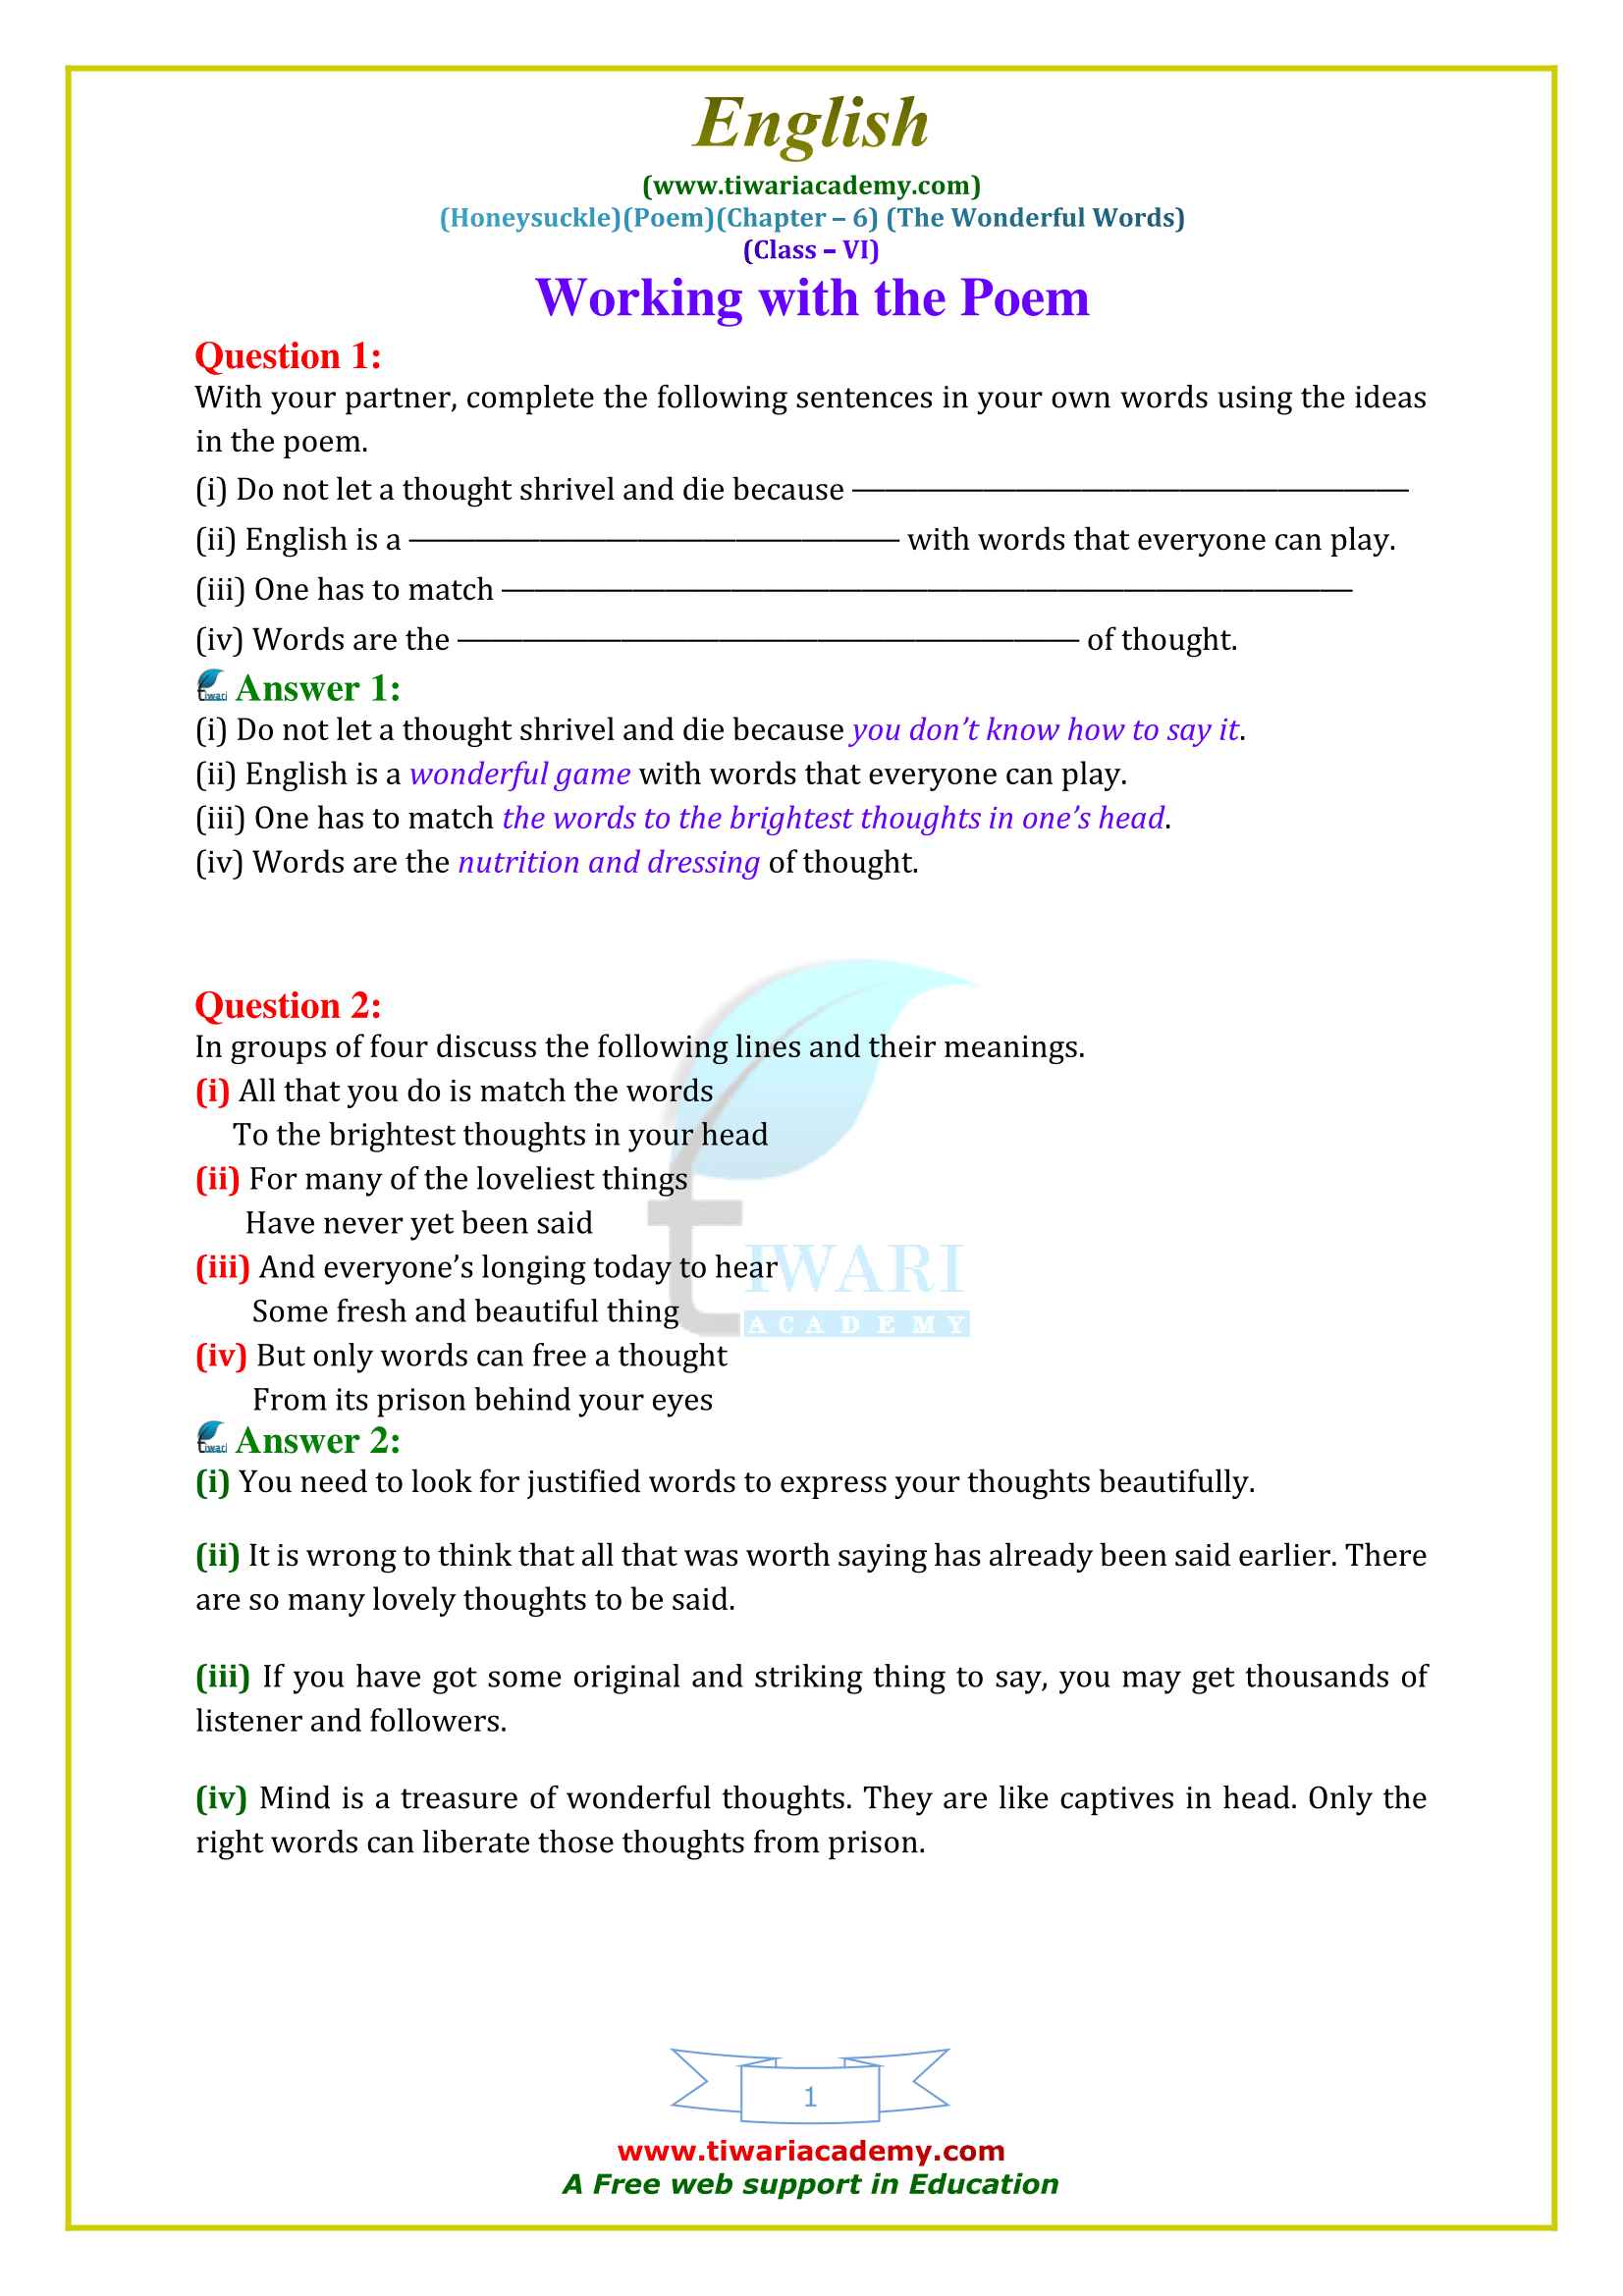 NCERT Solutions for Class 6 English Honeysuckle Poem 6 The Wonderful Words